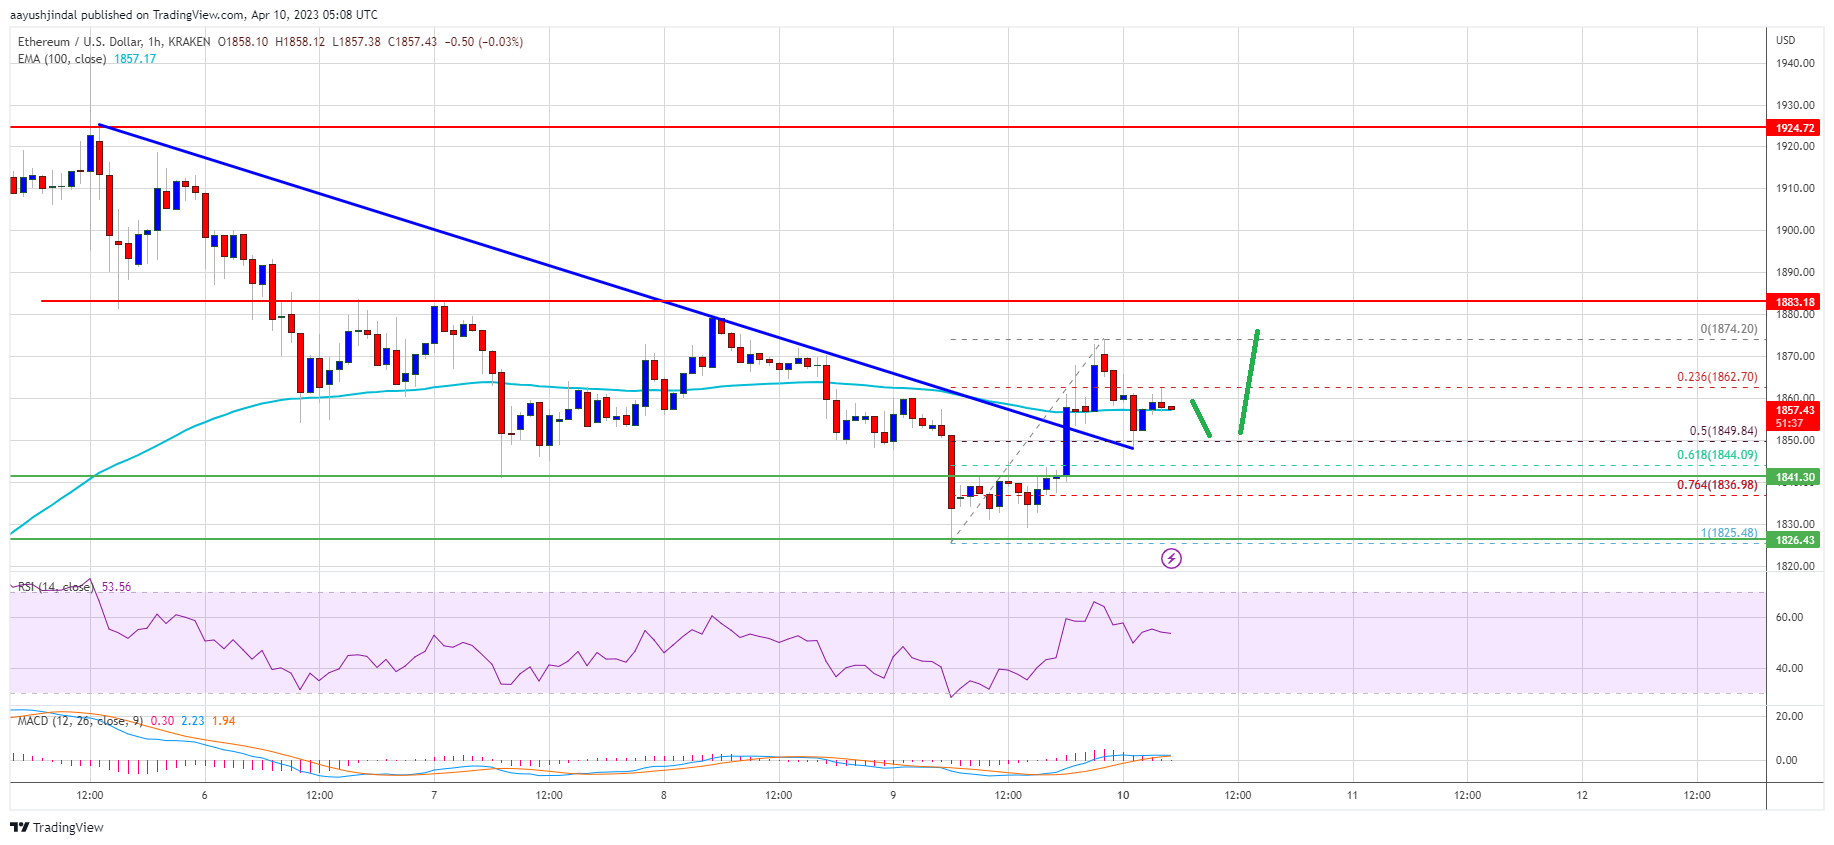 Ethereum Price Looks Ready For Another Leg Higher Over $1,880